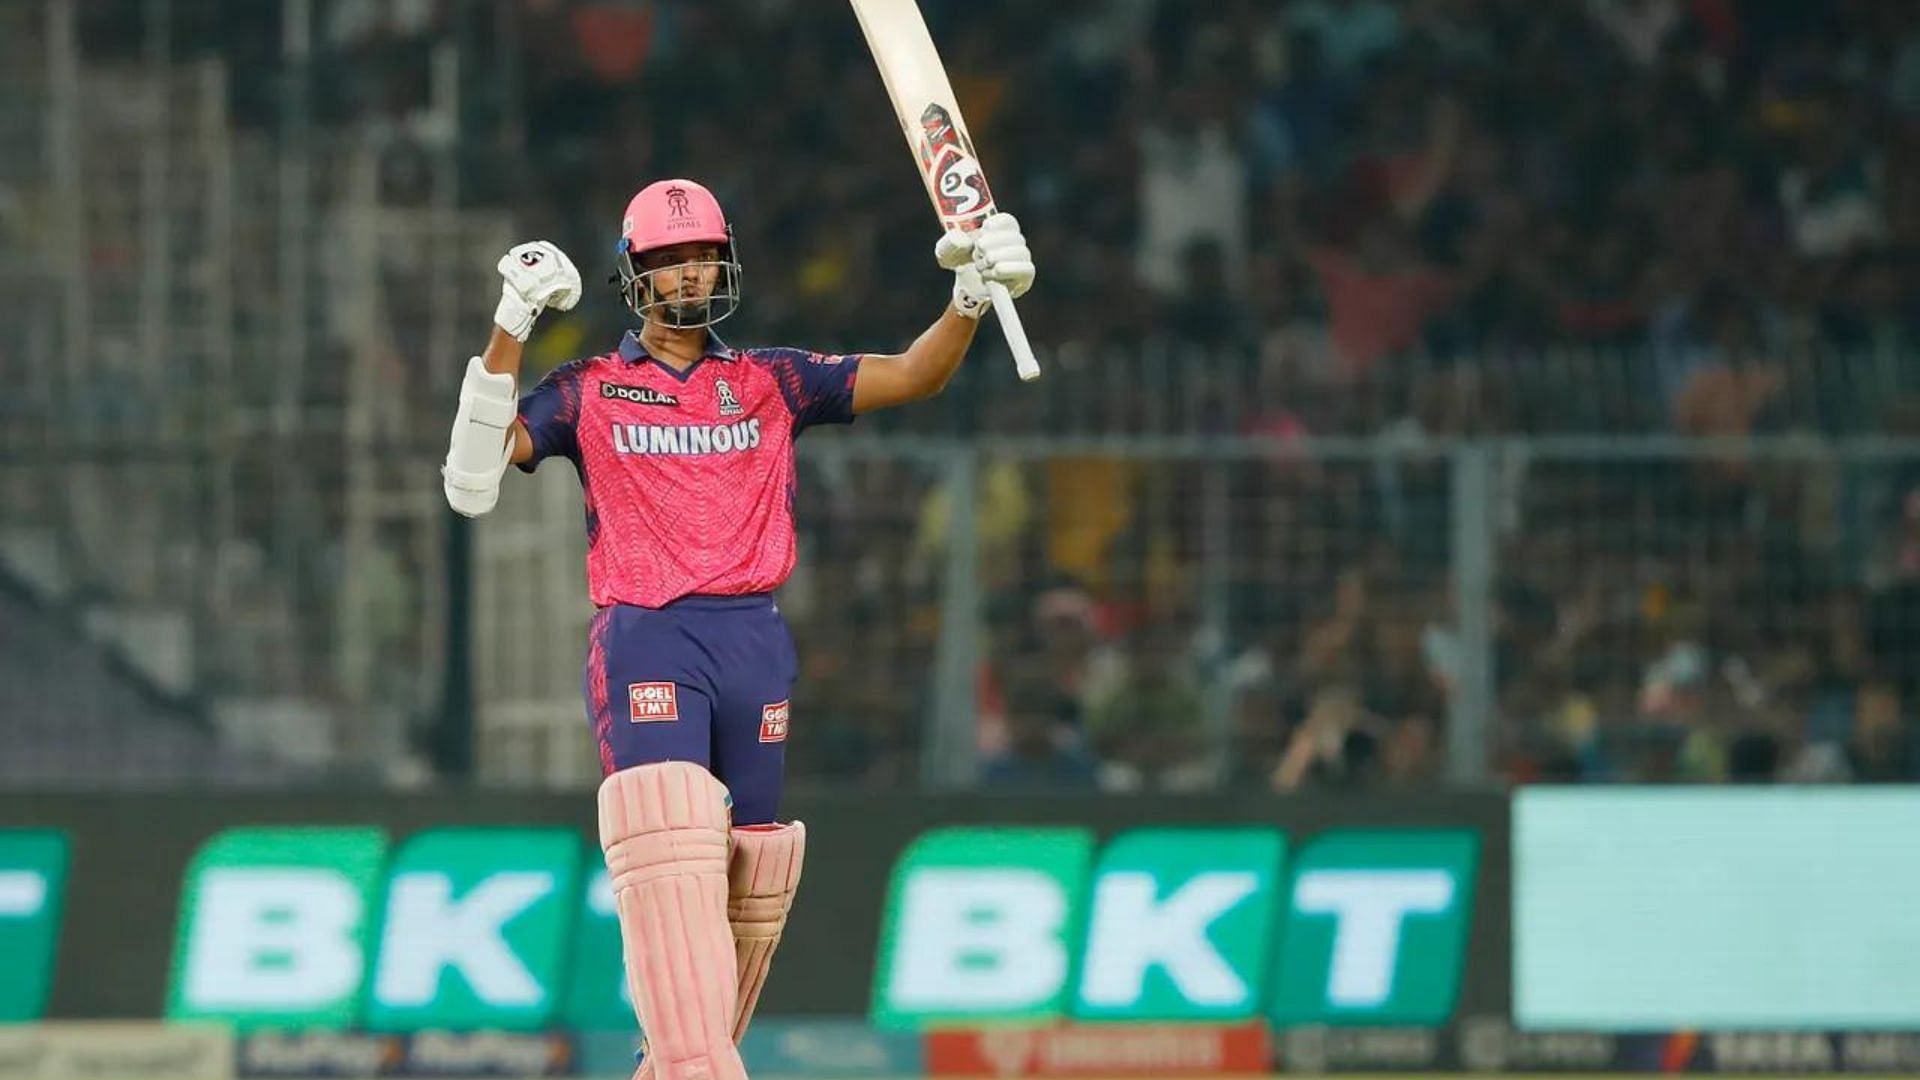 Yashasvi Jaiswal scored the fastest fifty in IPL history in his previous game against KKR (P.C.:iplt20.com)